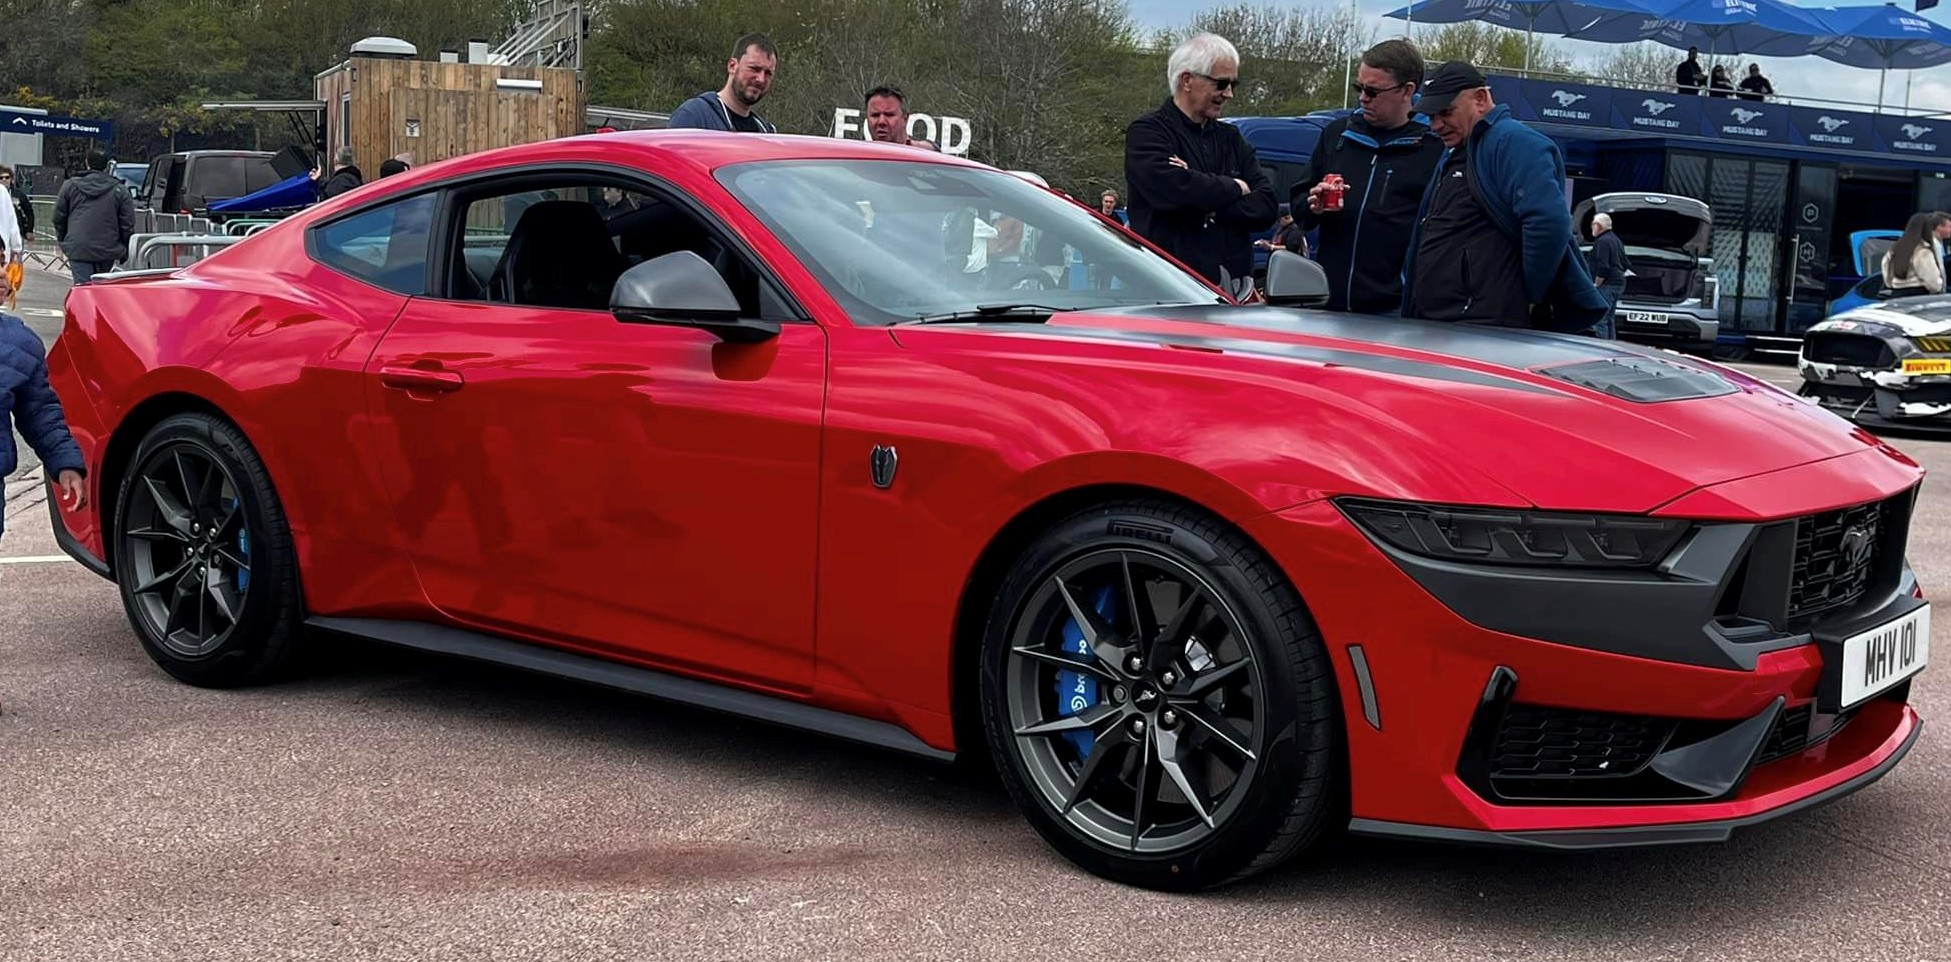 S650 Mustang UK reveal of the S650: Race Red Dark Horse Mustang DH 14